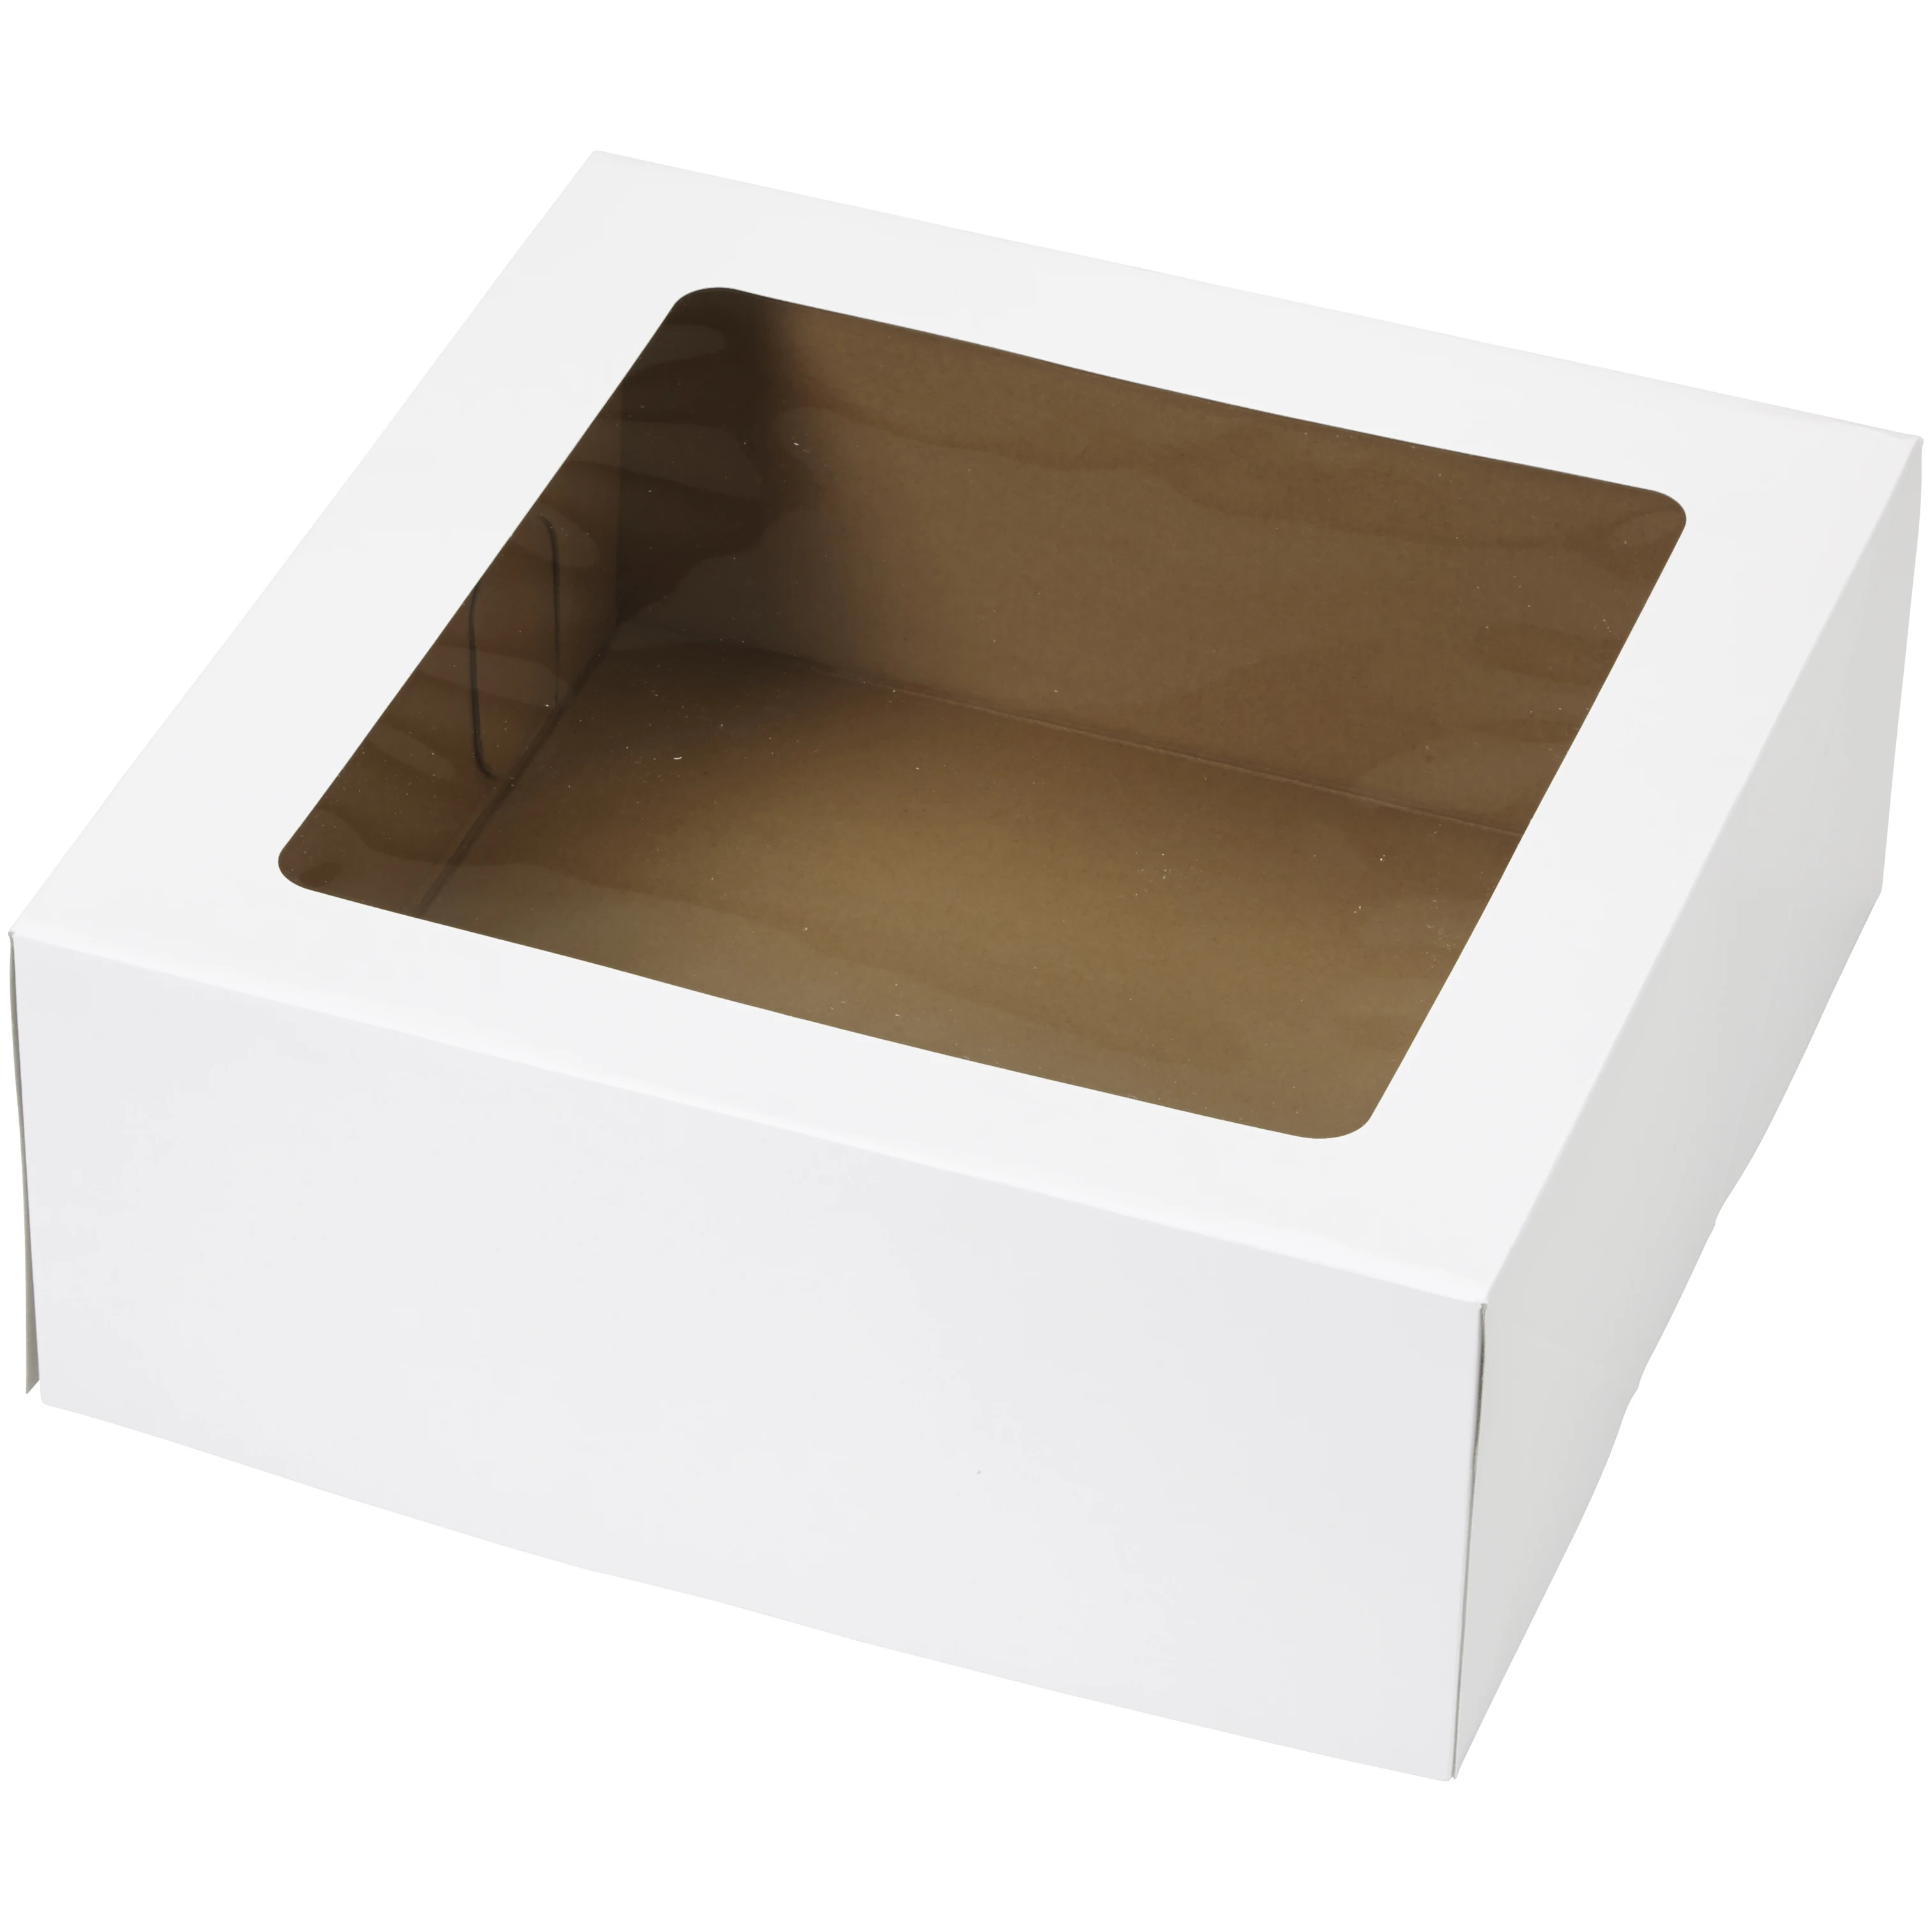 www.HamesChocolates.co.uk - Extra Large White Bakery and Patisserie Cake Box  - Single Wall Base & Fold-Up Window Lid 230mm x 230mm x 100mm Self-assemble